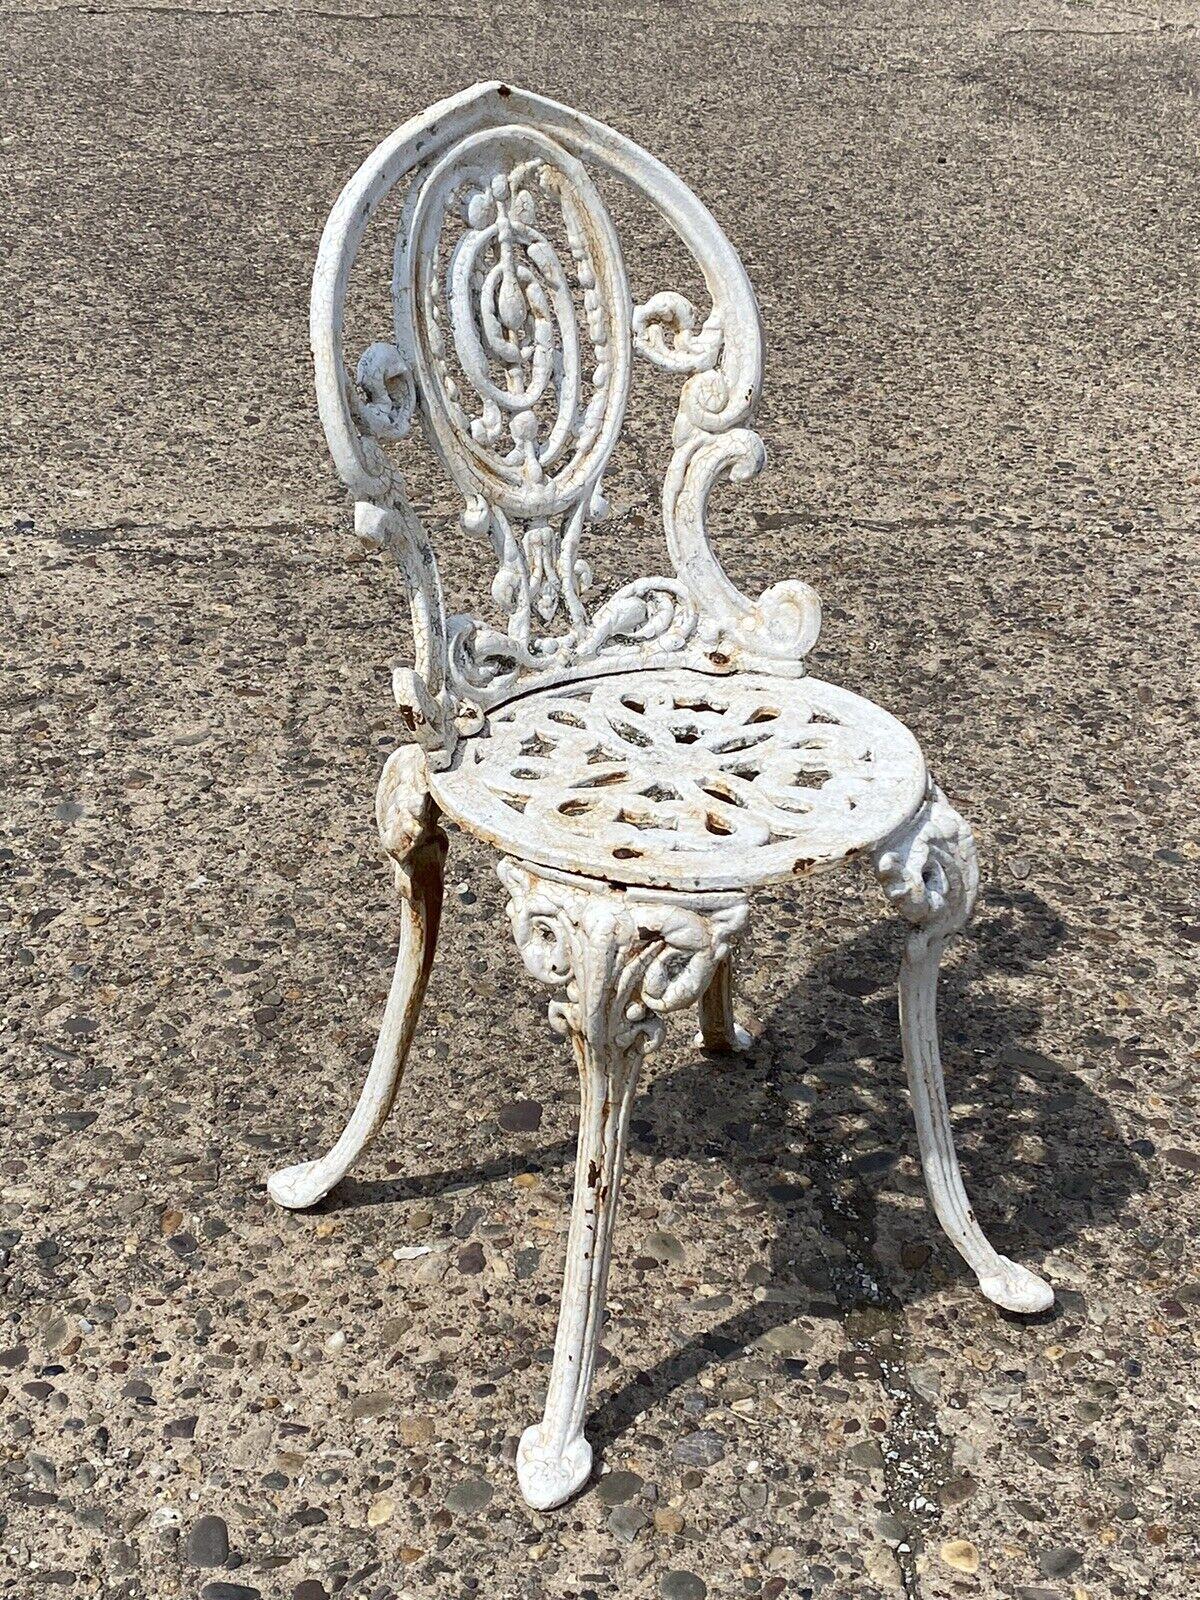 Antique French Victorian Cast Iron White Small Garden Patio Side Chair. Item featured is a nice small size, heavy cast iron construction, white painted finish, very nice antique chair. Circa 19th Century. Measurements: 30